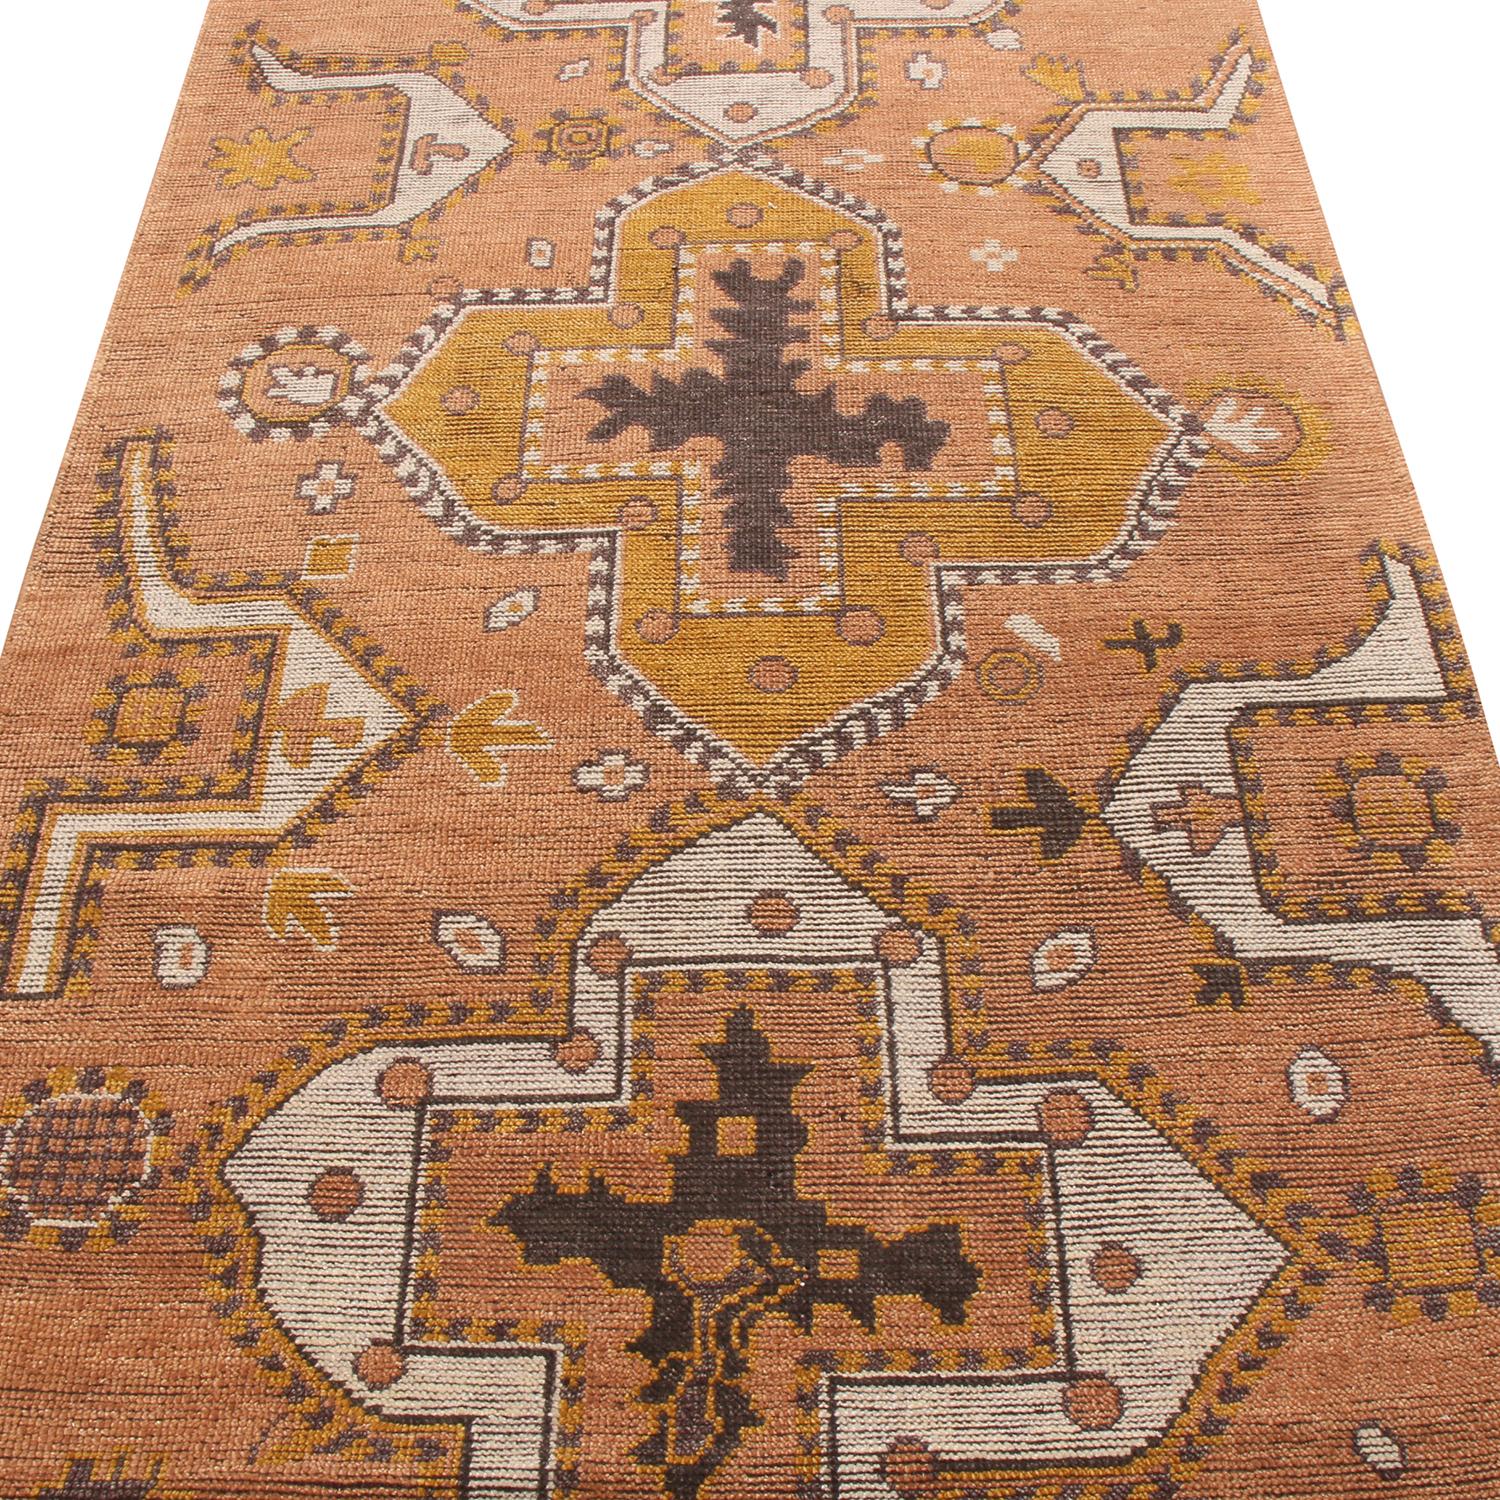 Hand-Knotted Burano Golden-Orange and Grey Wool Rug